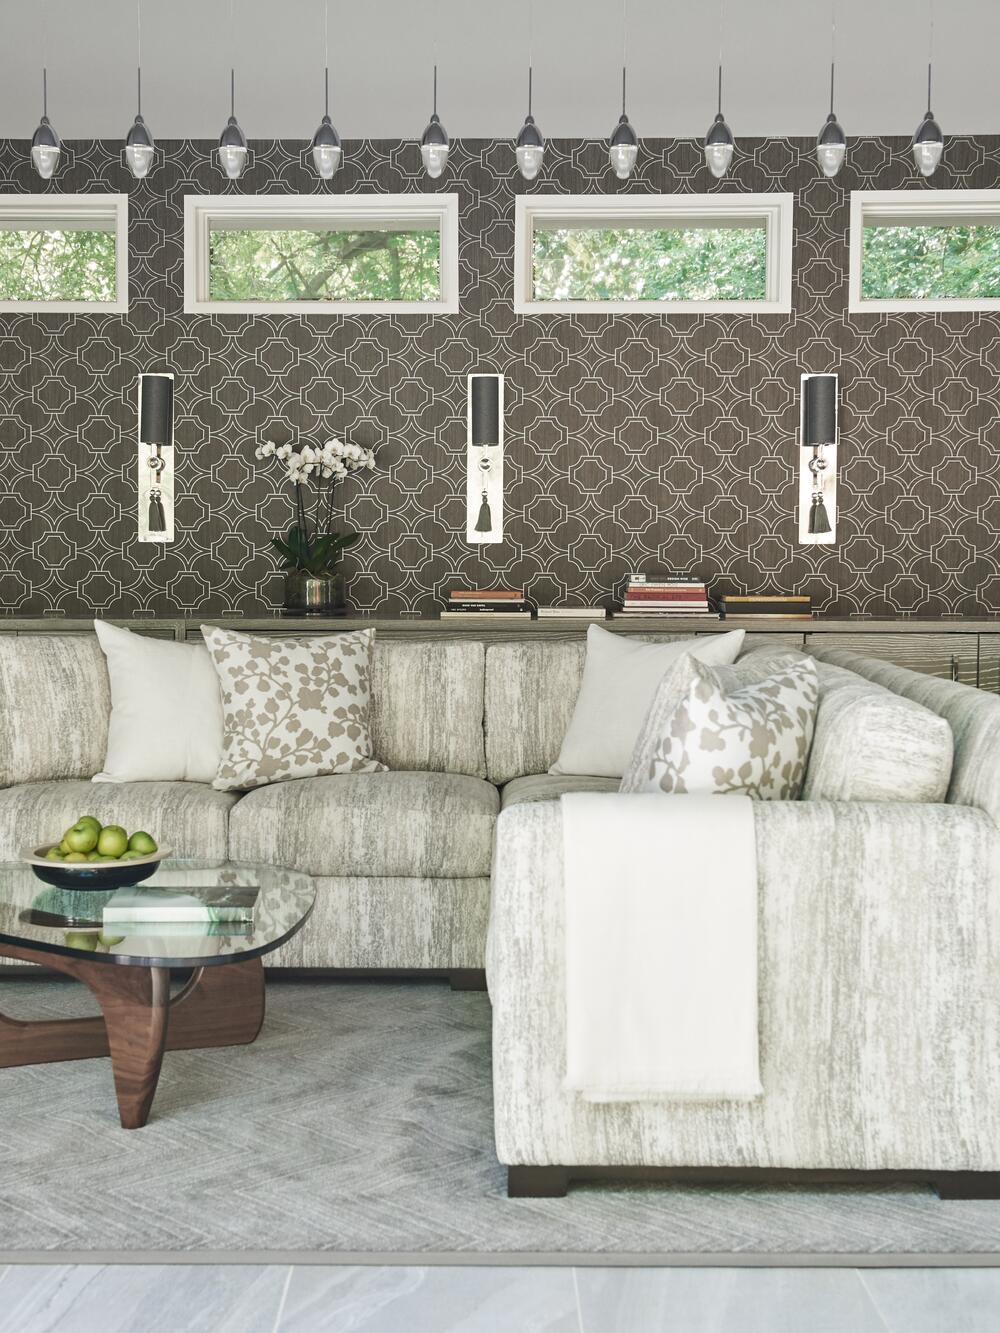 Creating a Luxurious, Livable Home with Vern Yip’s InsideOut Performance Collection